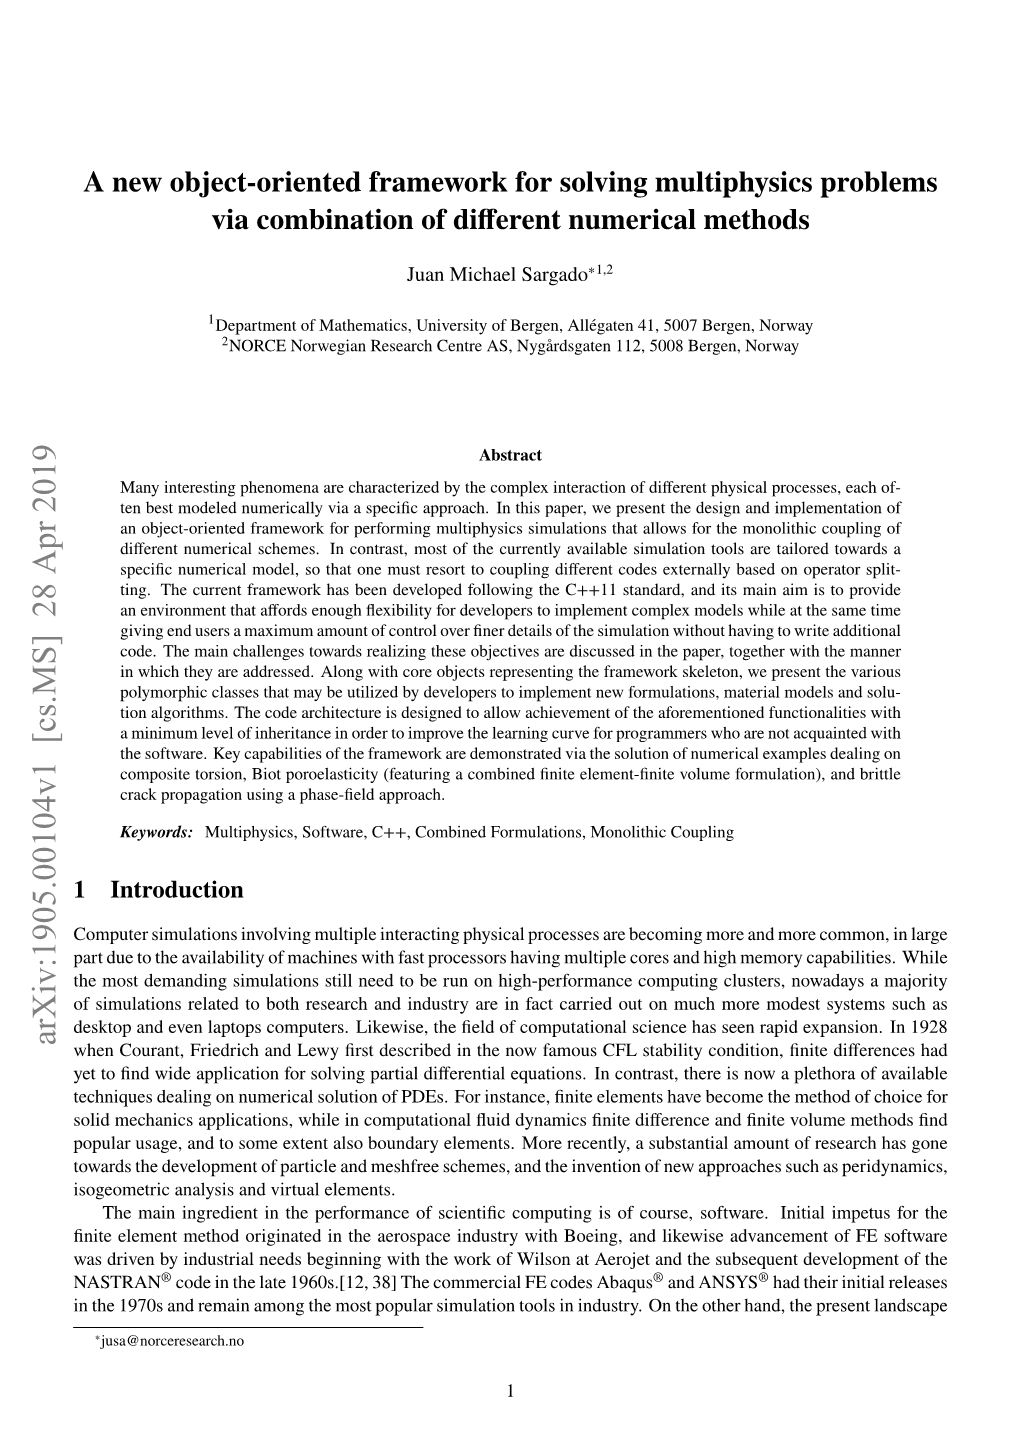 A New Object-Oriented Framework for Solving Multiphysics Problems Via Combination of Diﬀerent Numerical Methods